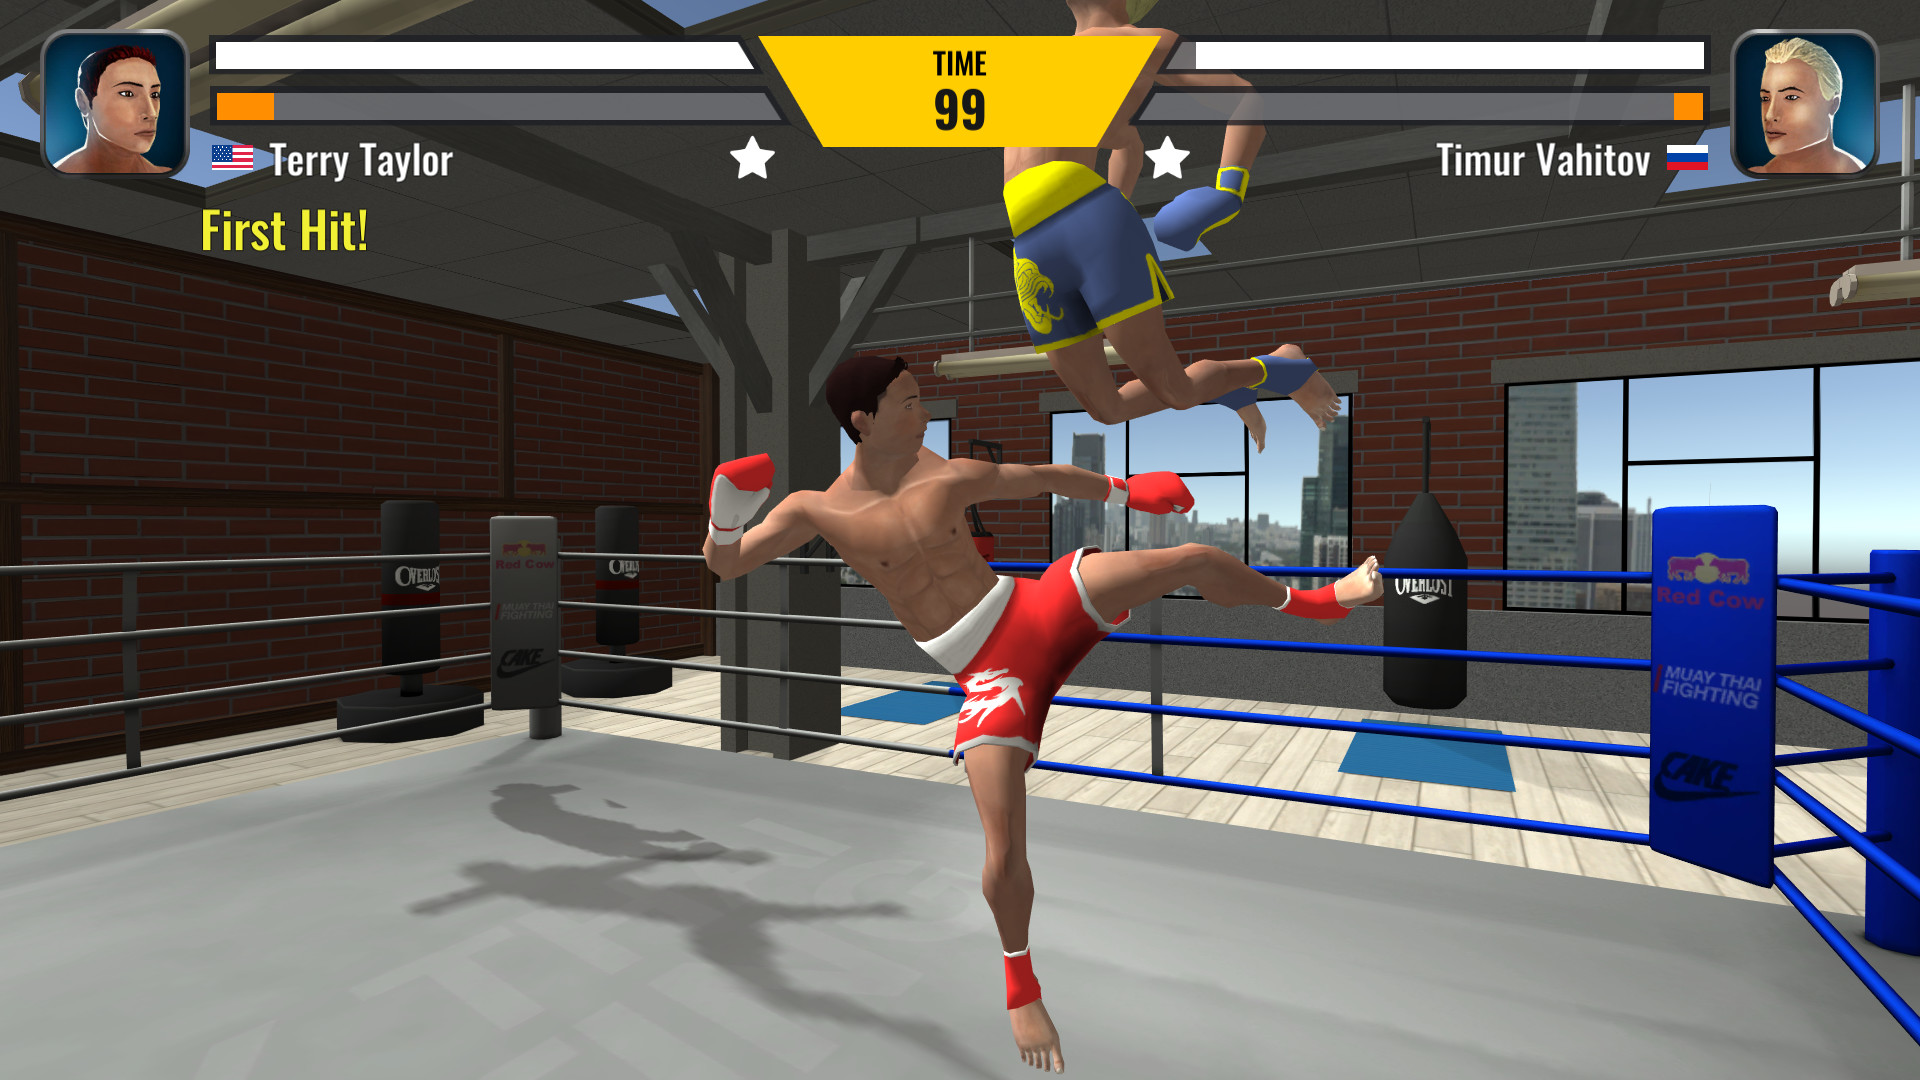 Shadowboxing online registration. Play the game online